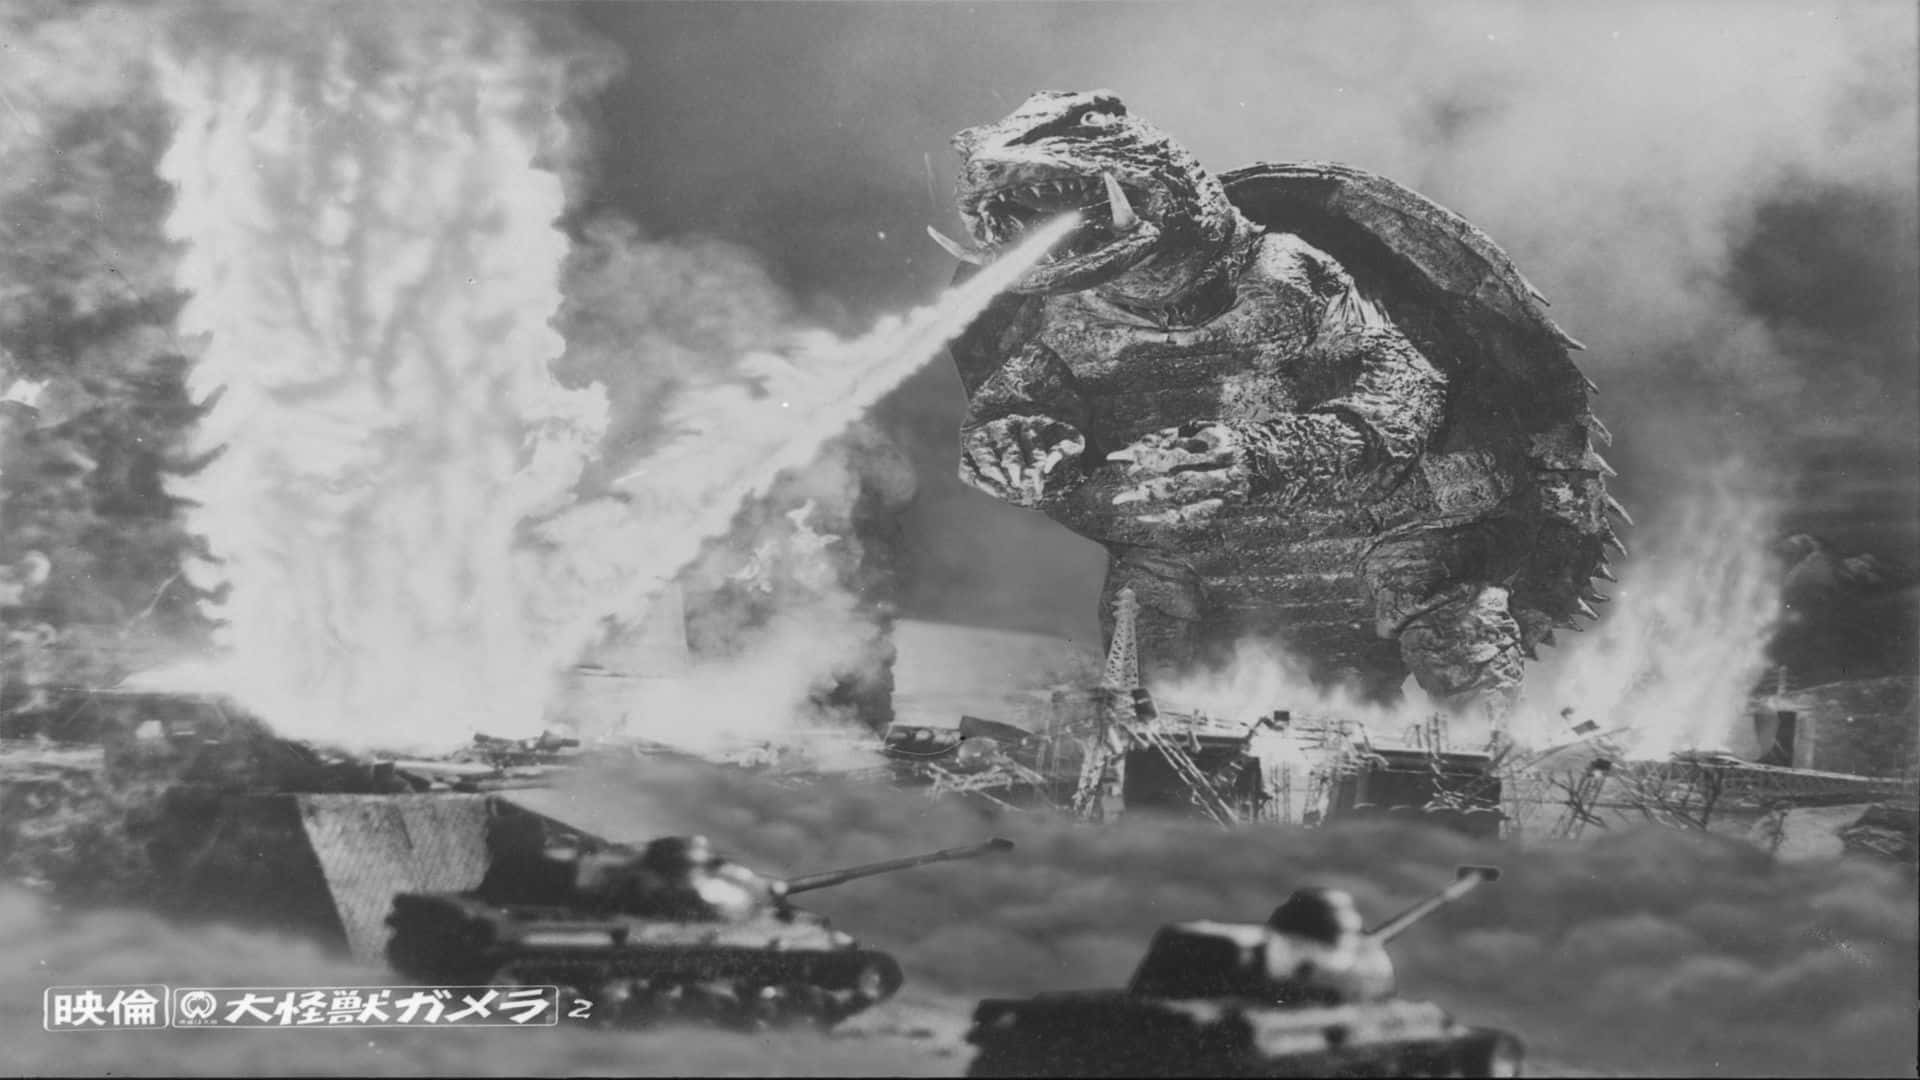 Gamera - The Guardian of the Universe protecting Earth against foes Wallpaper